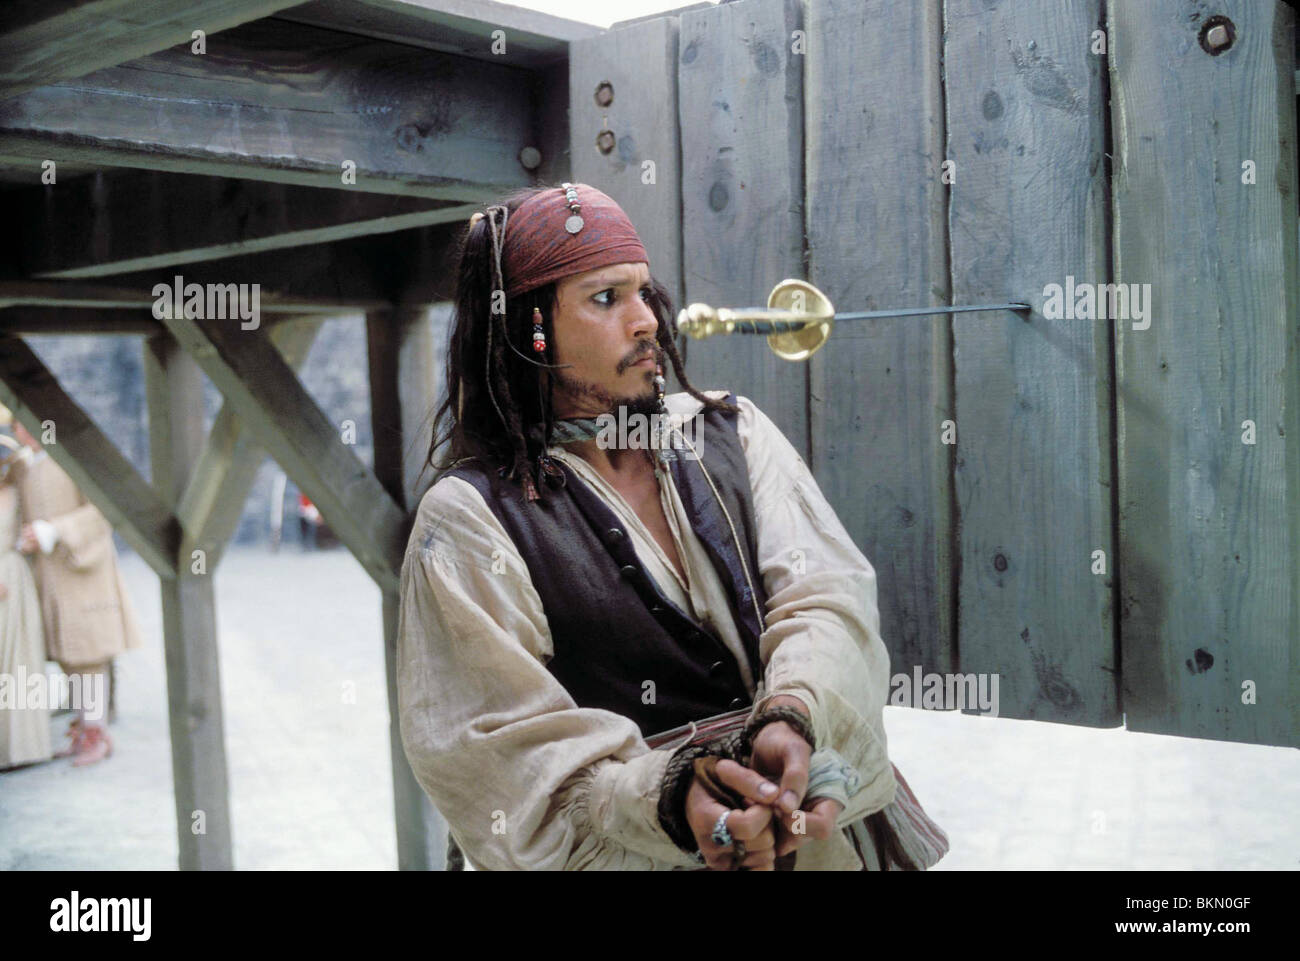 PIRATES OF THE CARIBBEAN: THE CURSE OF THE BLACK PEARL (2003) JOHNNY DEPP CREDIT DISNEY PIRC 001-15 Stock Photo